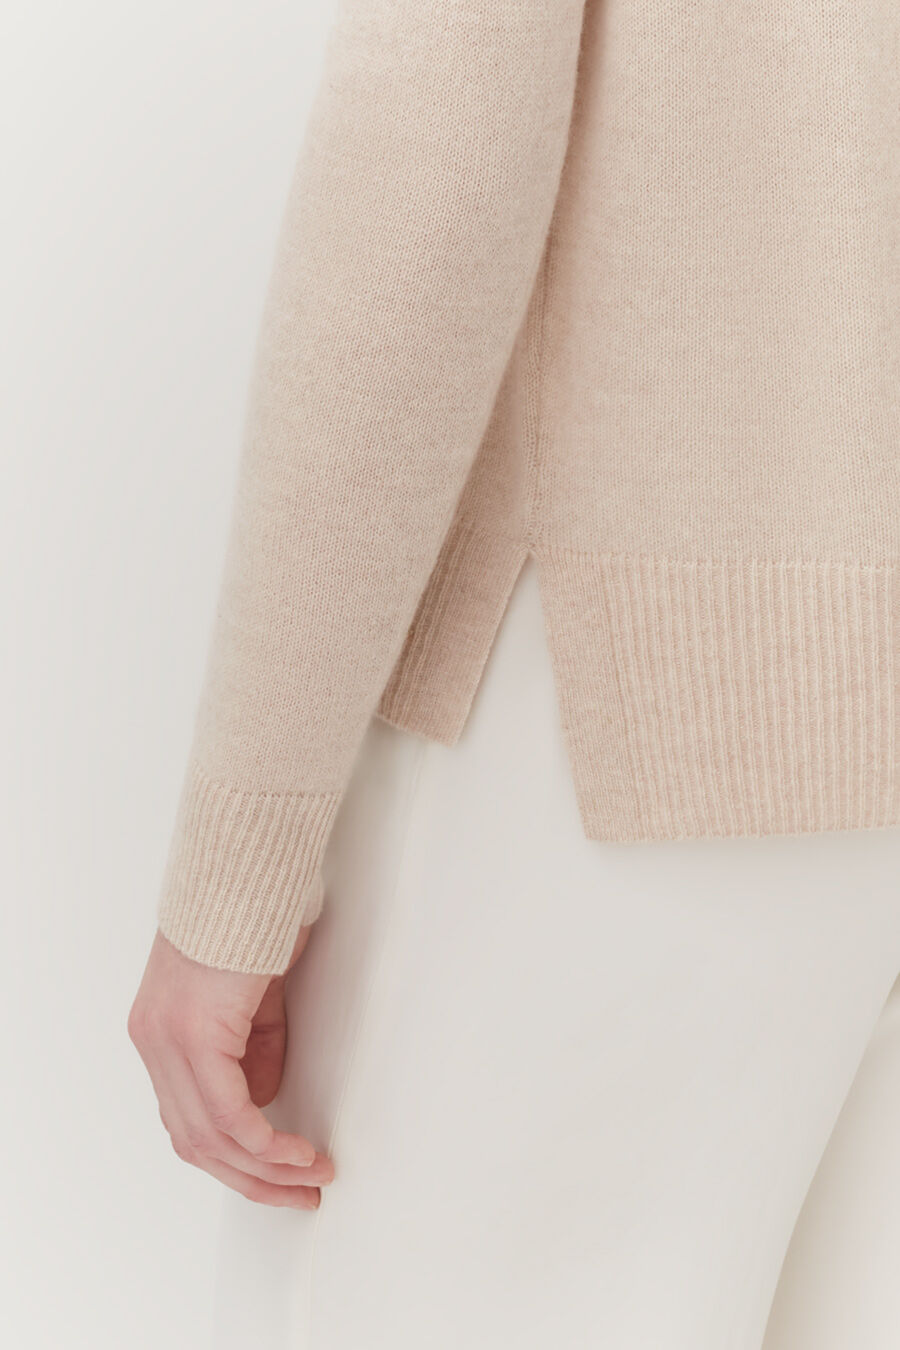 Close-up of a person's arm in a sweater leaning against a wall